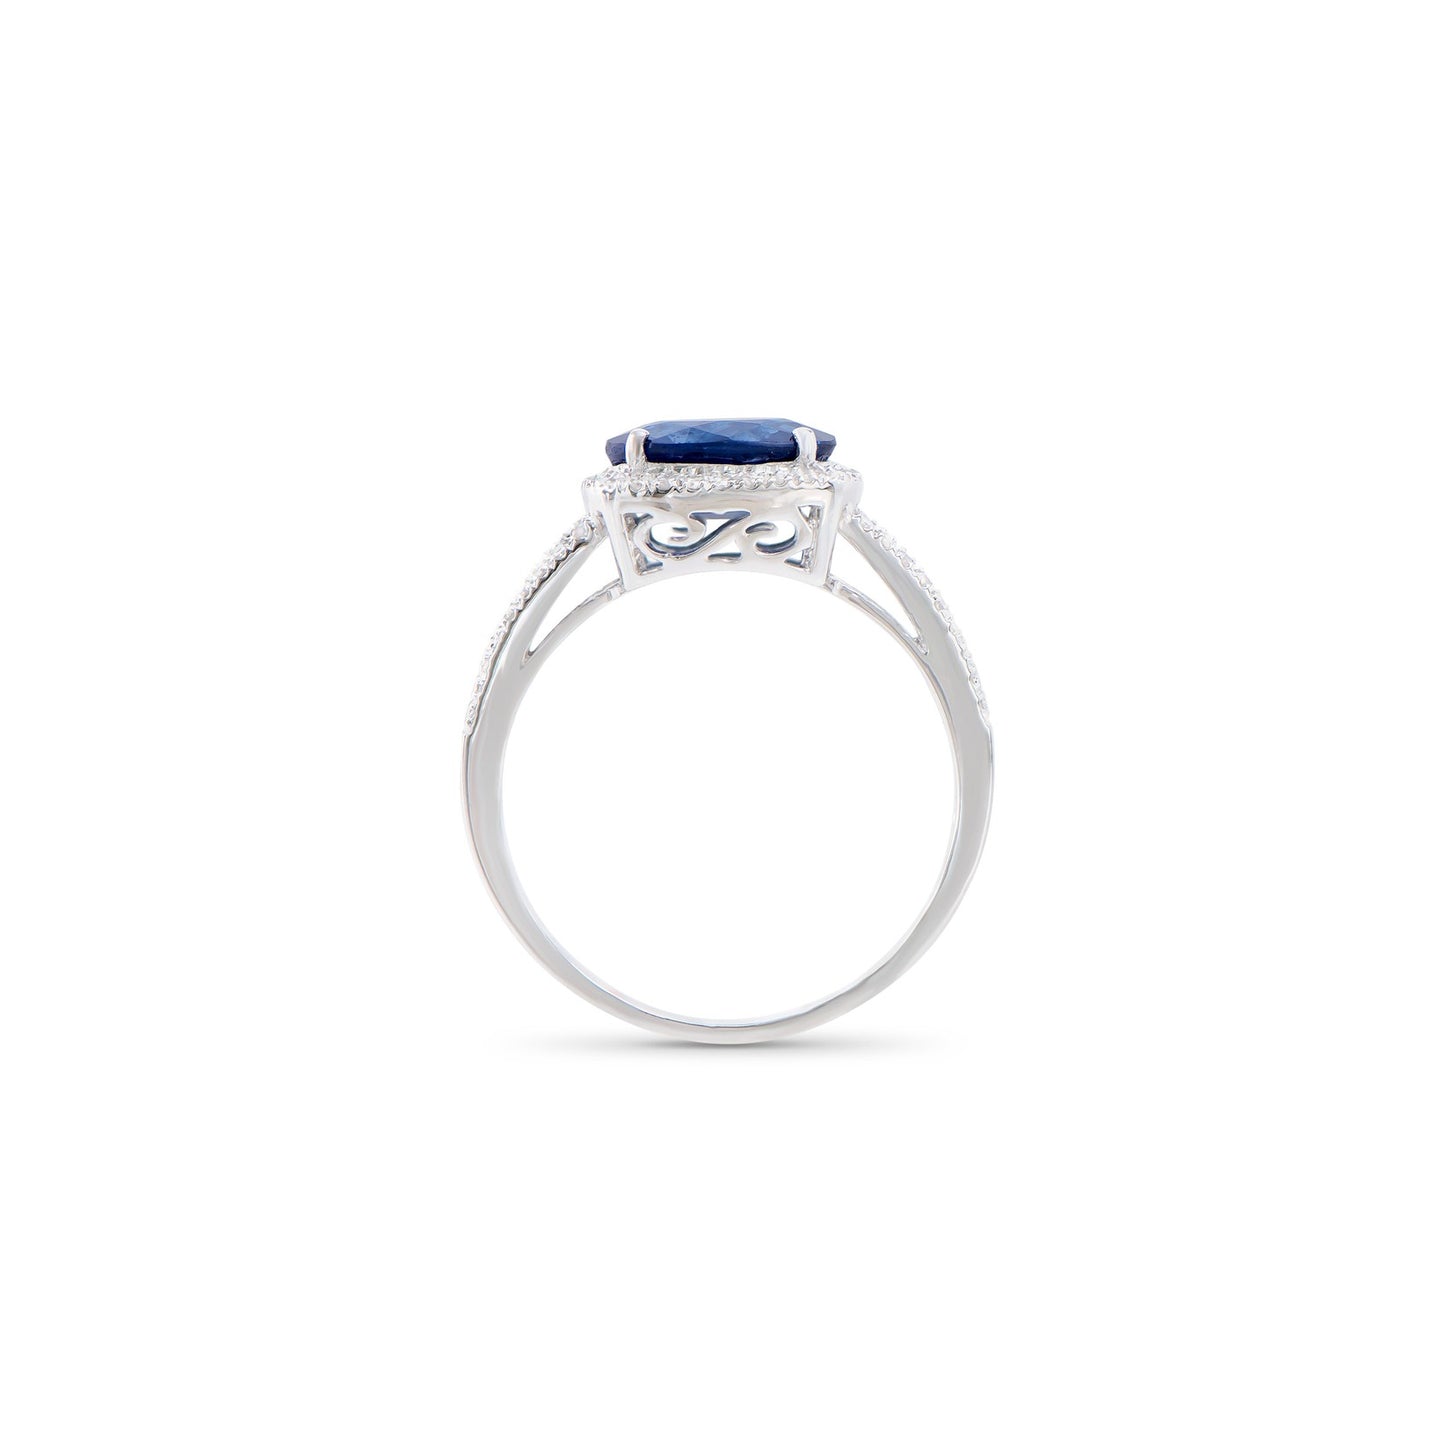 14KT White Gold 2.05ct Blue Sapphire and Diamond Ring